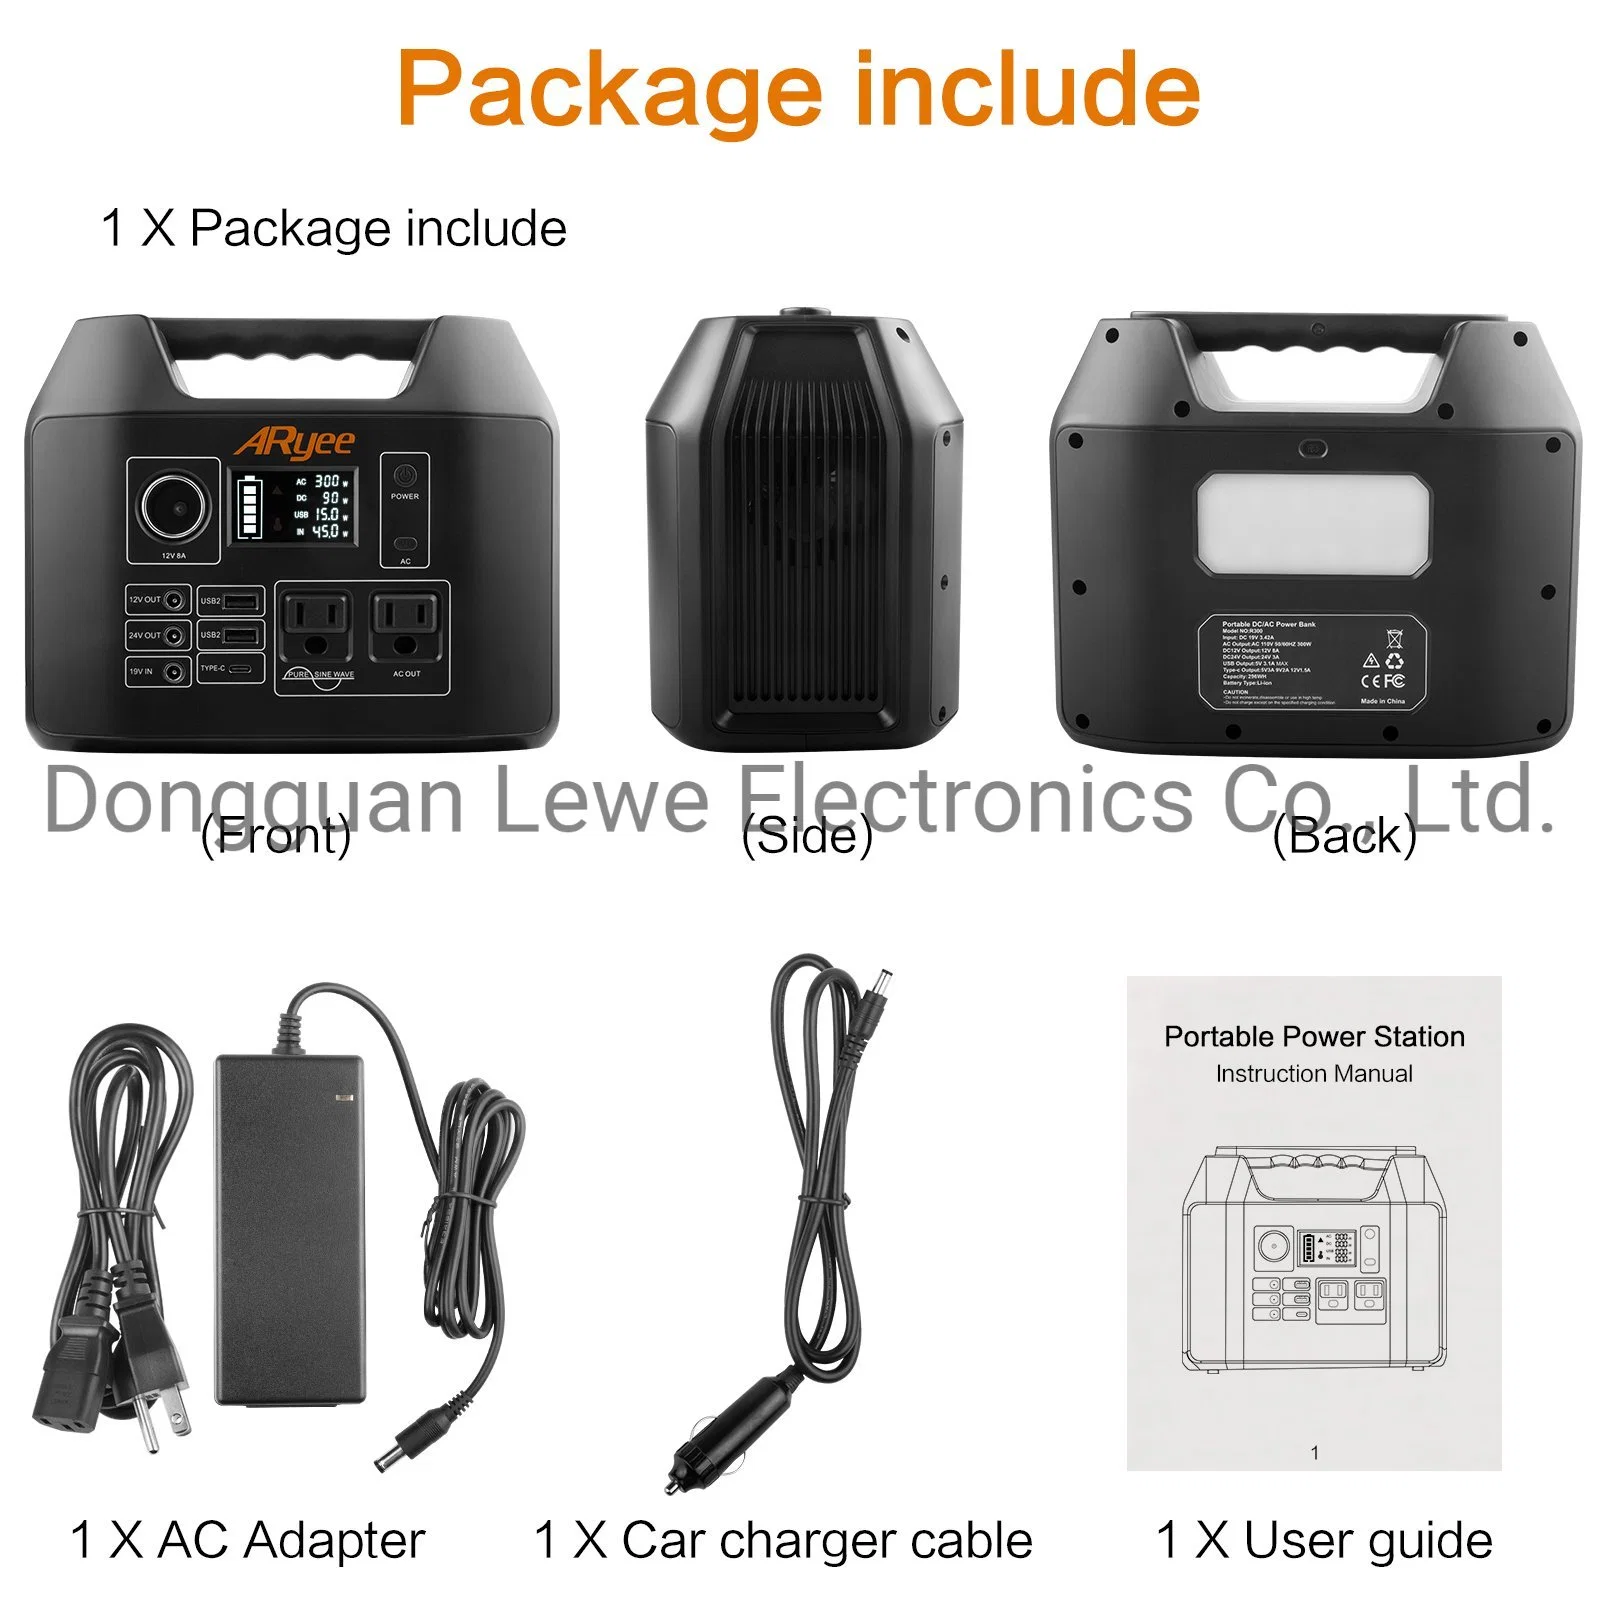 Portable Power Stationr300 296wh/80000mAh Solar Generator, Pure Sine Wave AC Outlet,DC Port Backup Lithium Battery for Outdoors Camping Travel Hunting Emergency